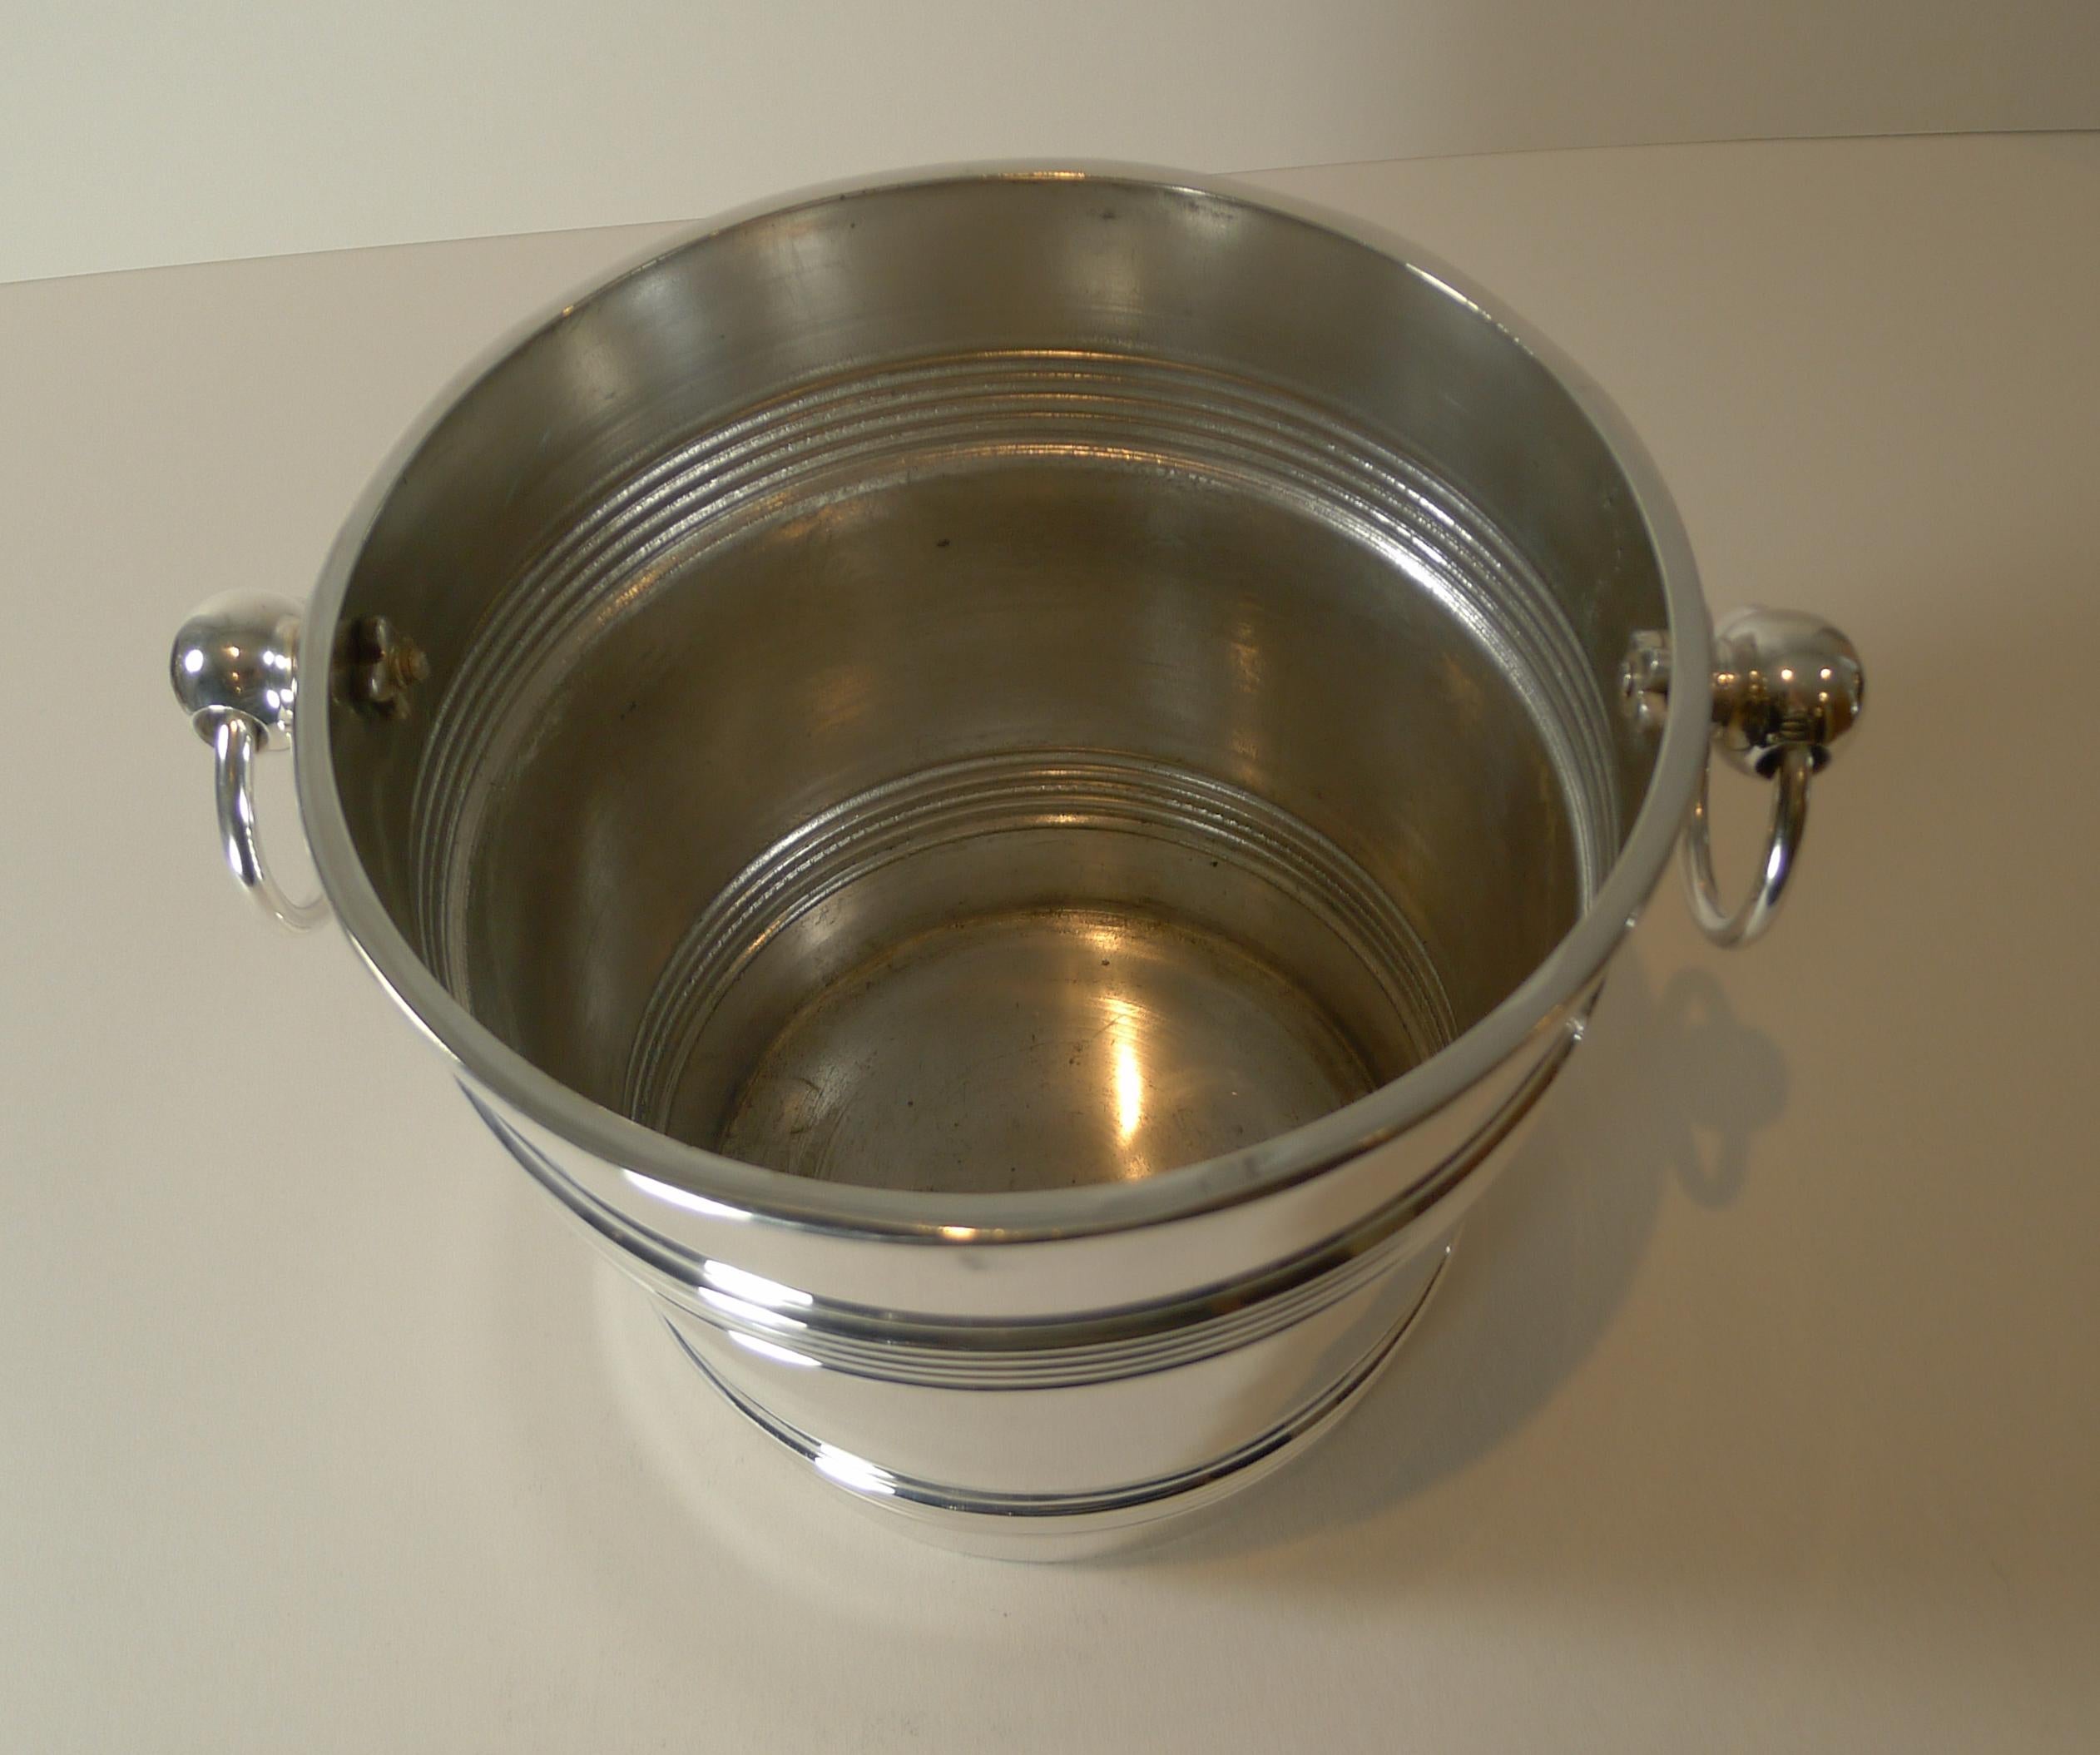 A magnificent and rare silver plated champagne bucket with removable cover, made by the top notch French silversmith, Cailar Bayard of Paris, fully marked on the underside.

Cailar & Bayard, 37 rue Grange-aux-Belles, Paris, founded in 1848 by Noel